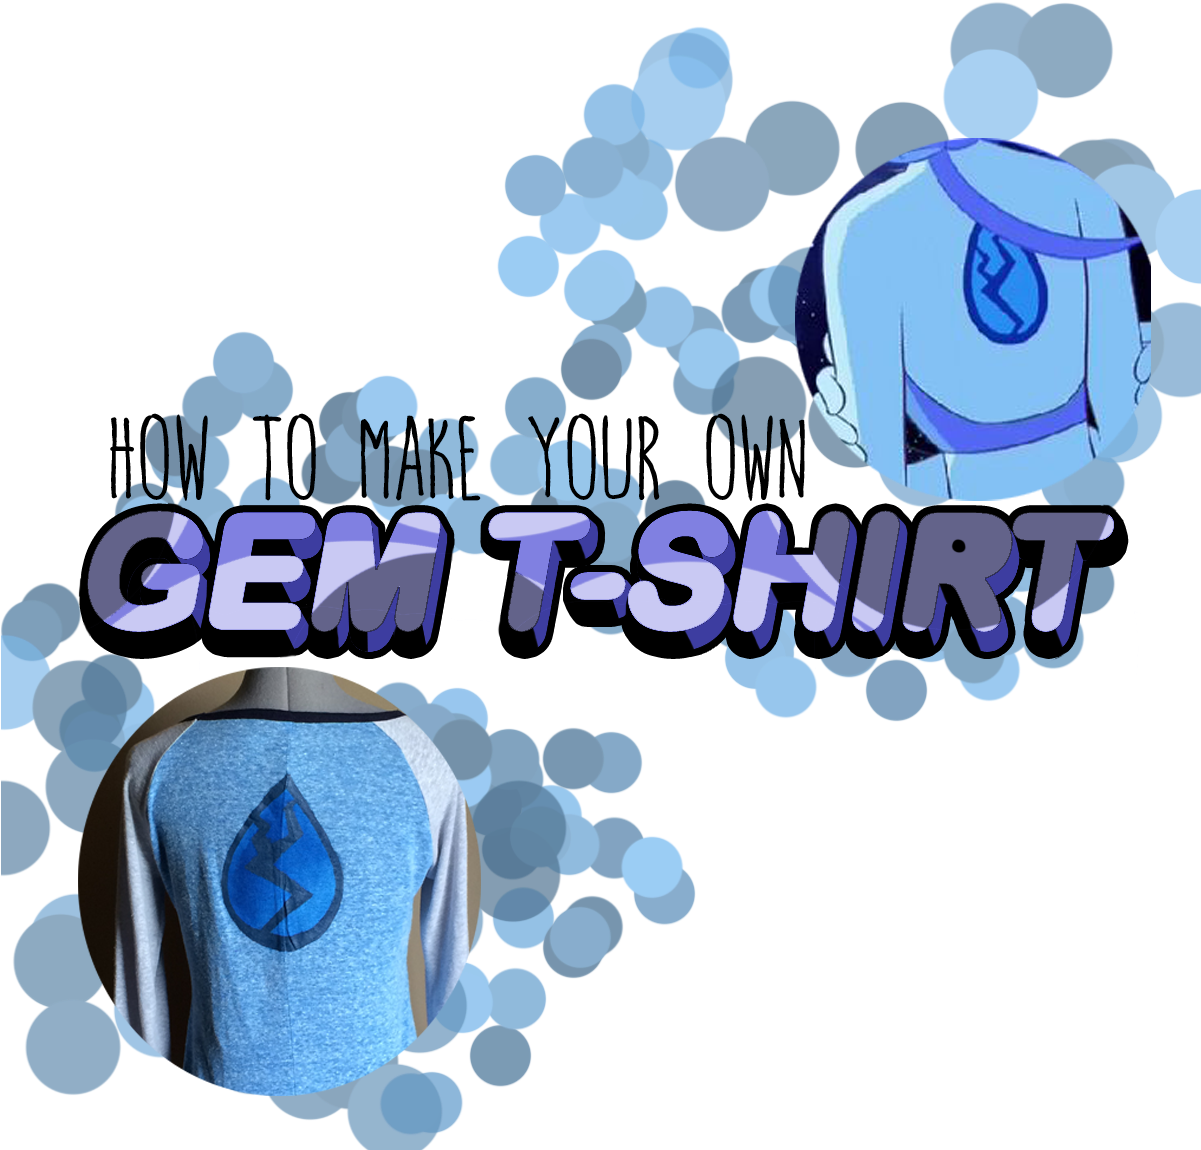 How To Make Your Own Gem T-shirt - Graphic Design (1200x1200)